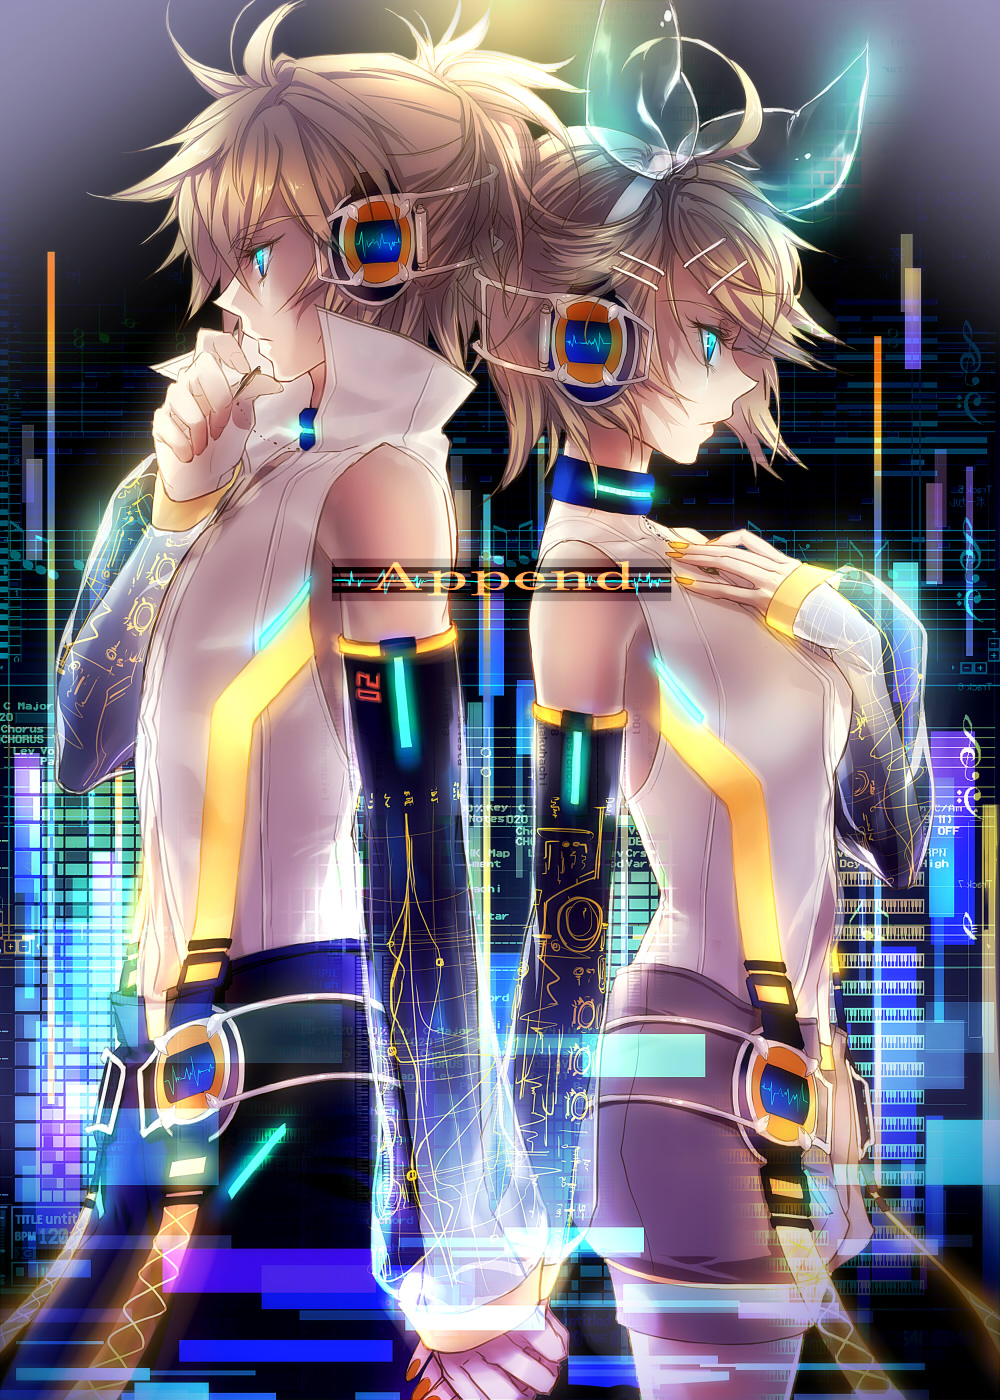 1girl aqua_eyes arm_warmers back-to-back blonde_hair brother_and_sister detached_sleeves hair_ornament hair_ribbon hairclip headphones highres holding_hands kagamine_len kagamine_len_(append) kagamine_rin kagamine_rin_(append) popped_collar ribbon short_hair shorts siblings twins vocaloid vocaloid_append yutif